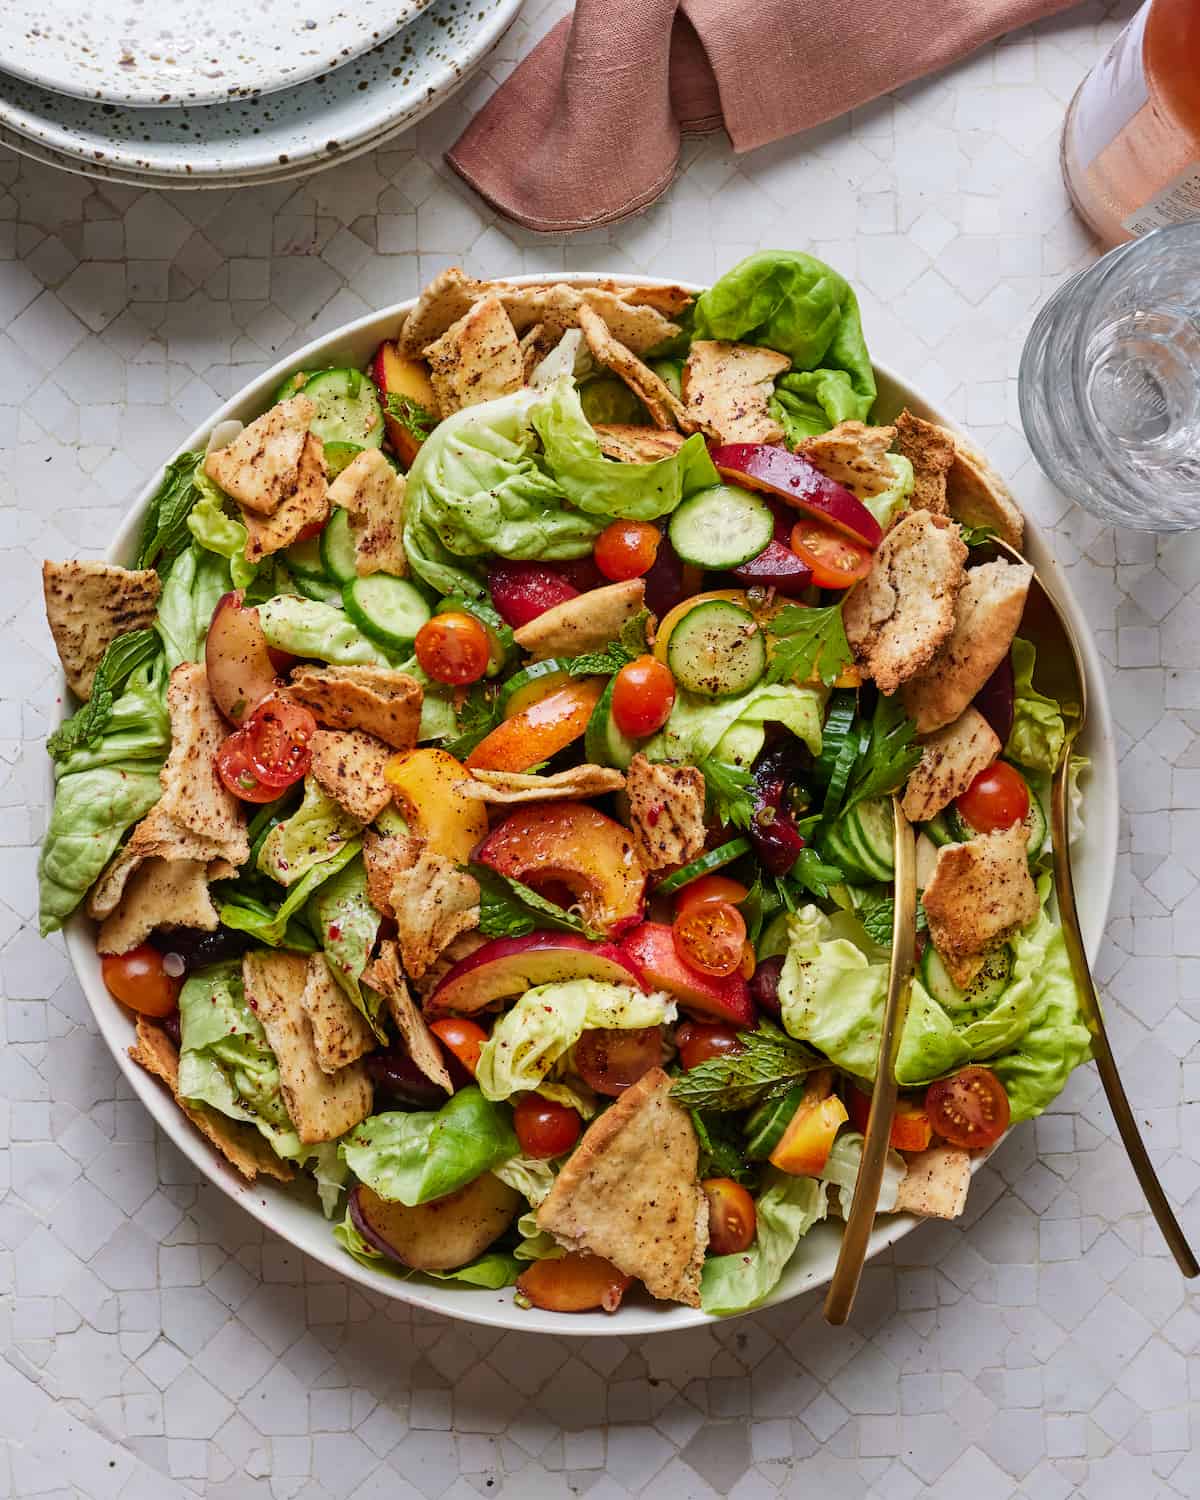 A large salad bowl filled with lettuce, halved cherry tomatoes, pita chips, sliced cucumbers, sliced stone fruit and mint.  